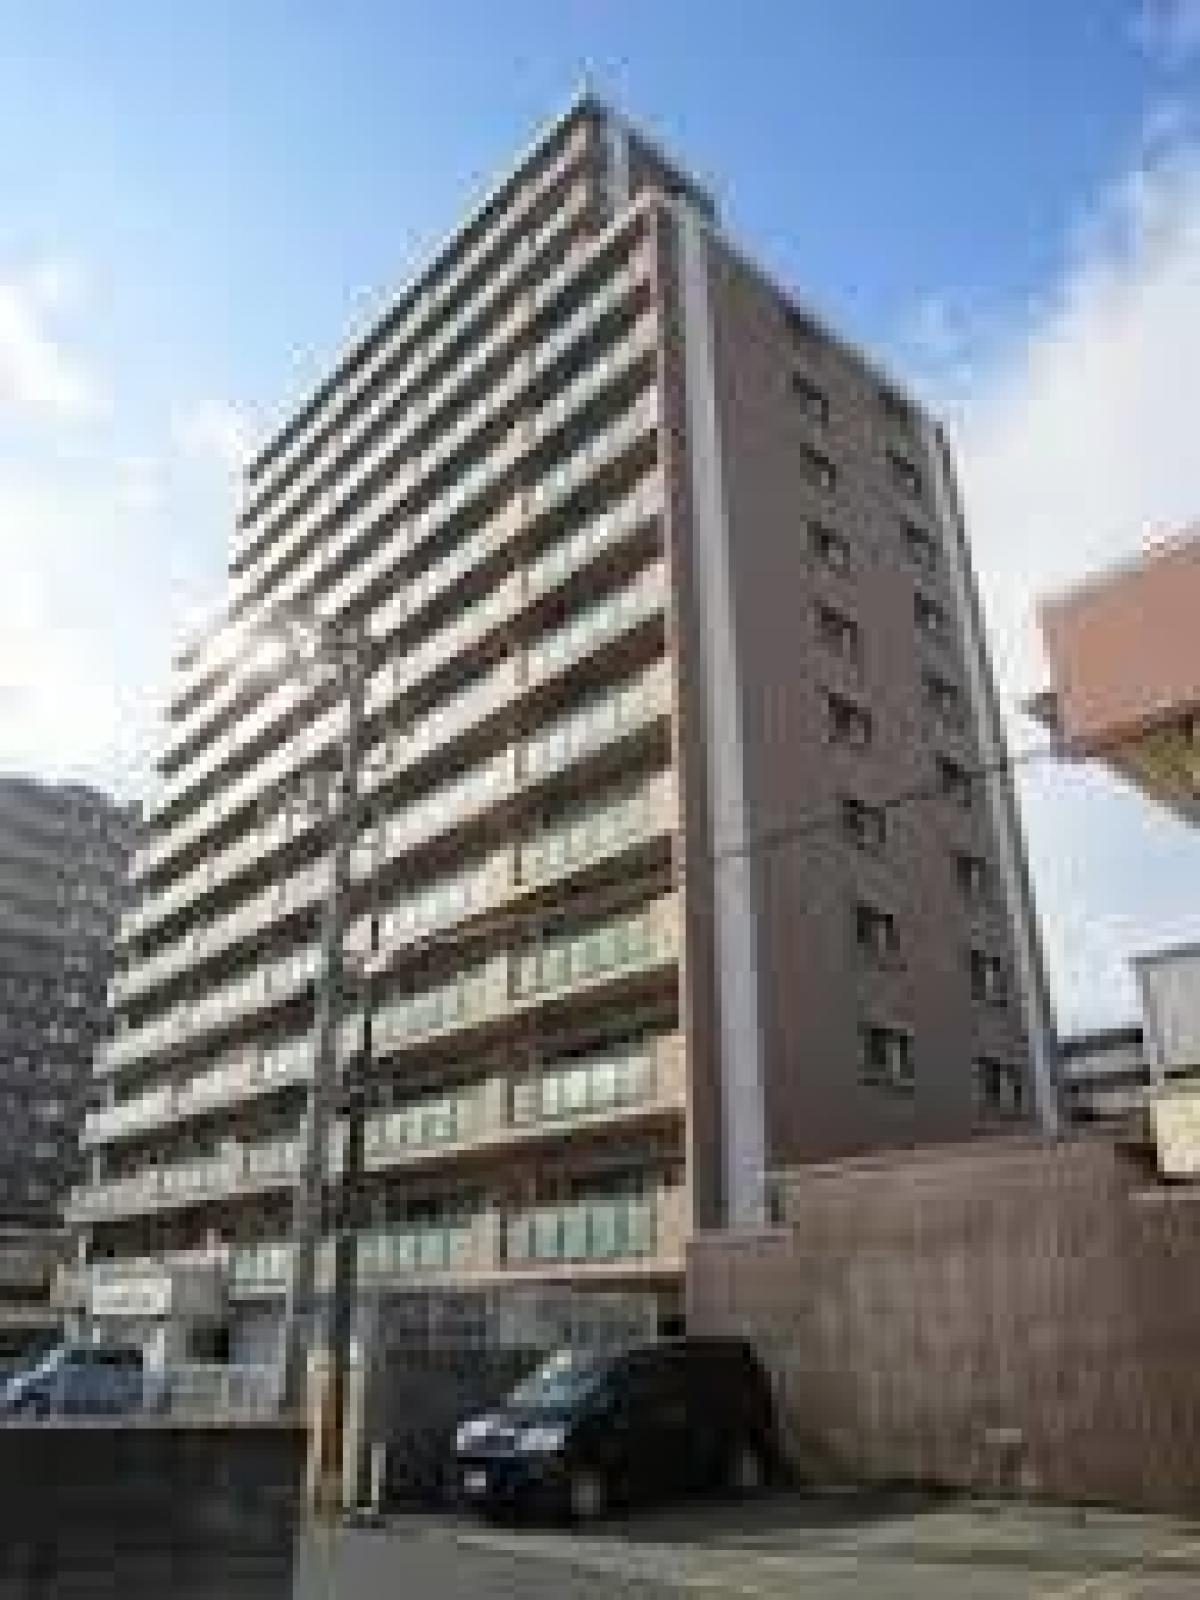 Picture of Apartment For Sale in Tottori Shi, Tottori, Japan